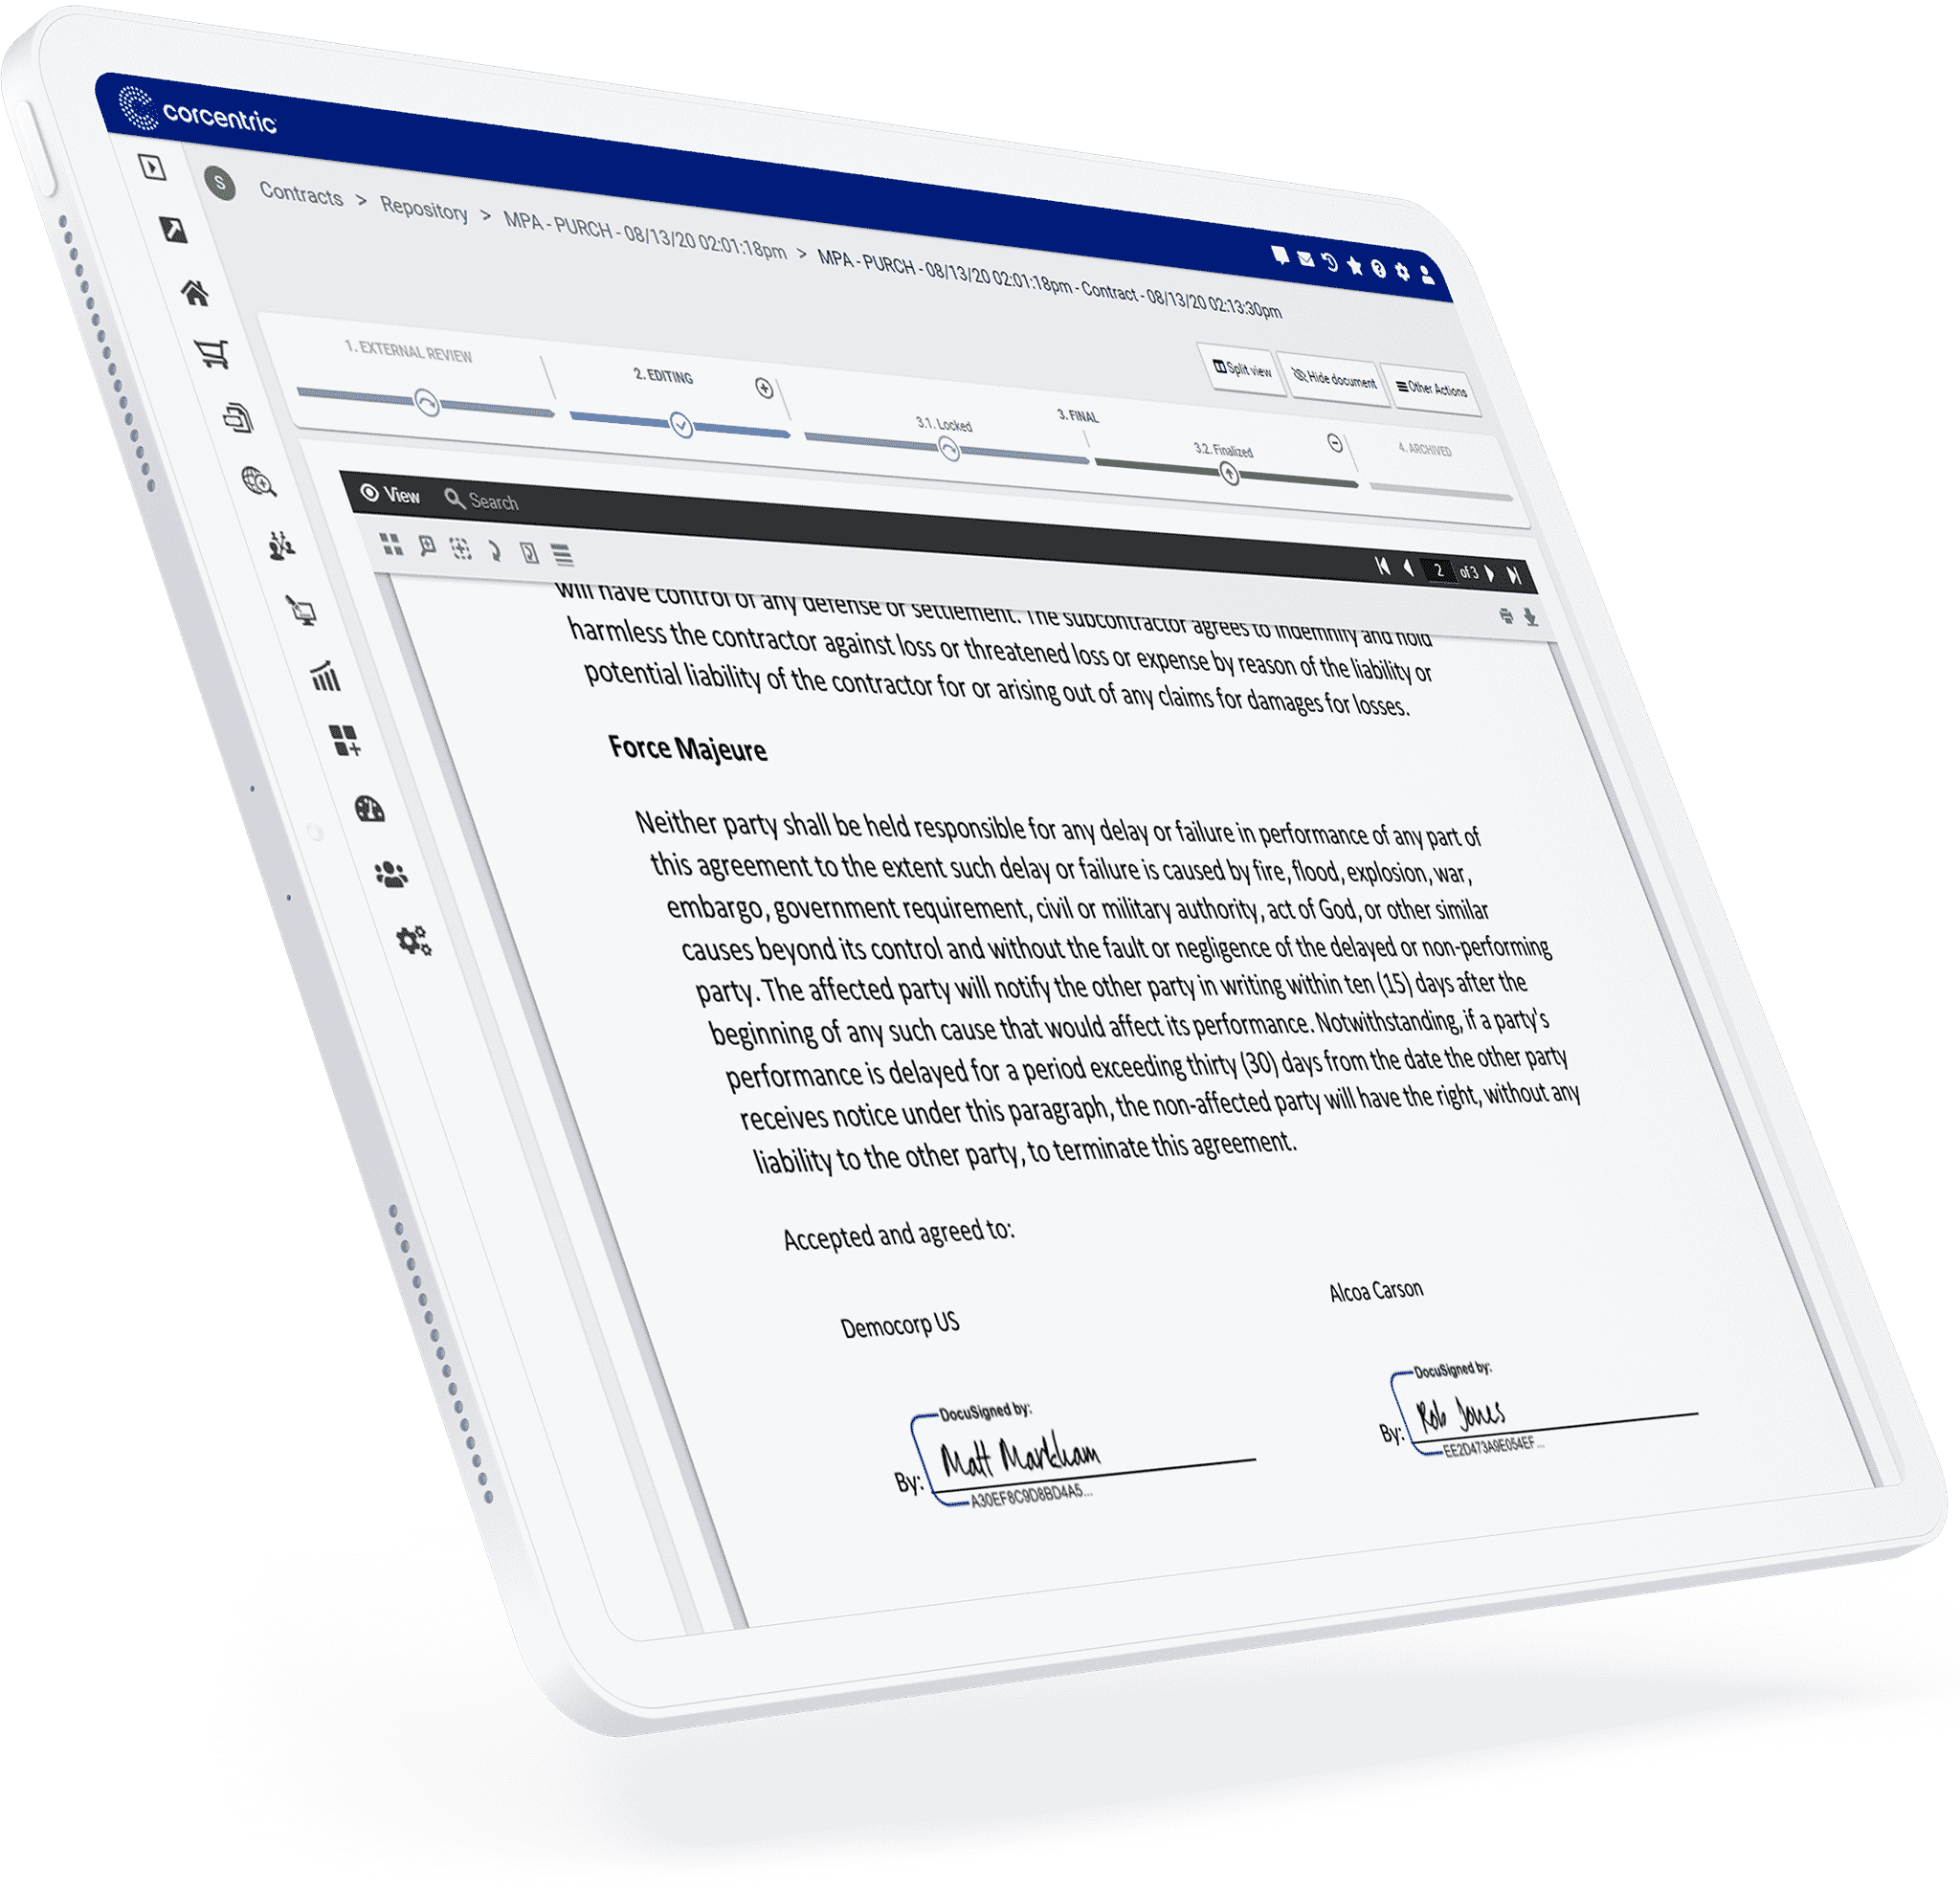 clm-signed-contract-tablet-screenshot-left